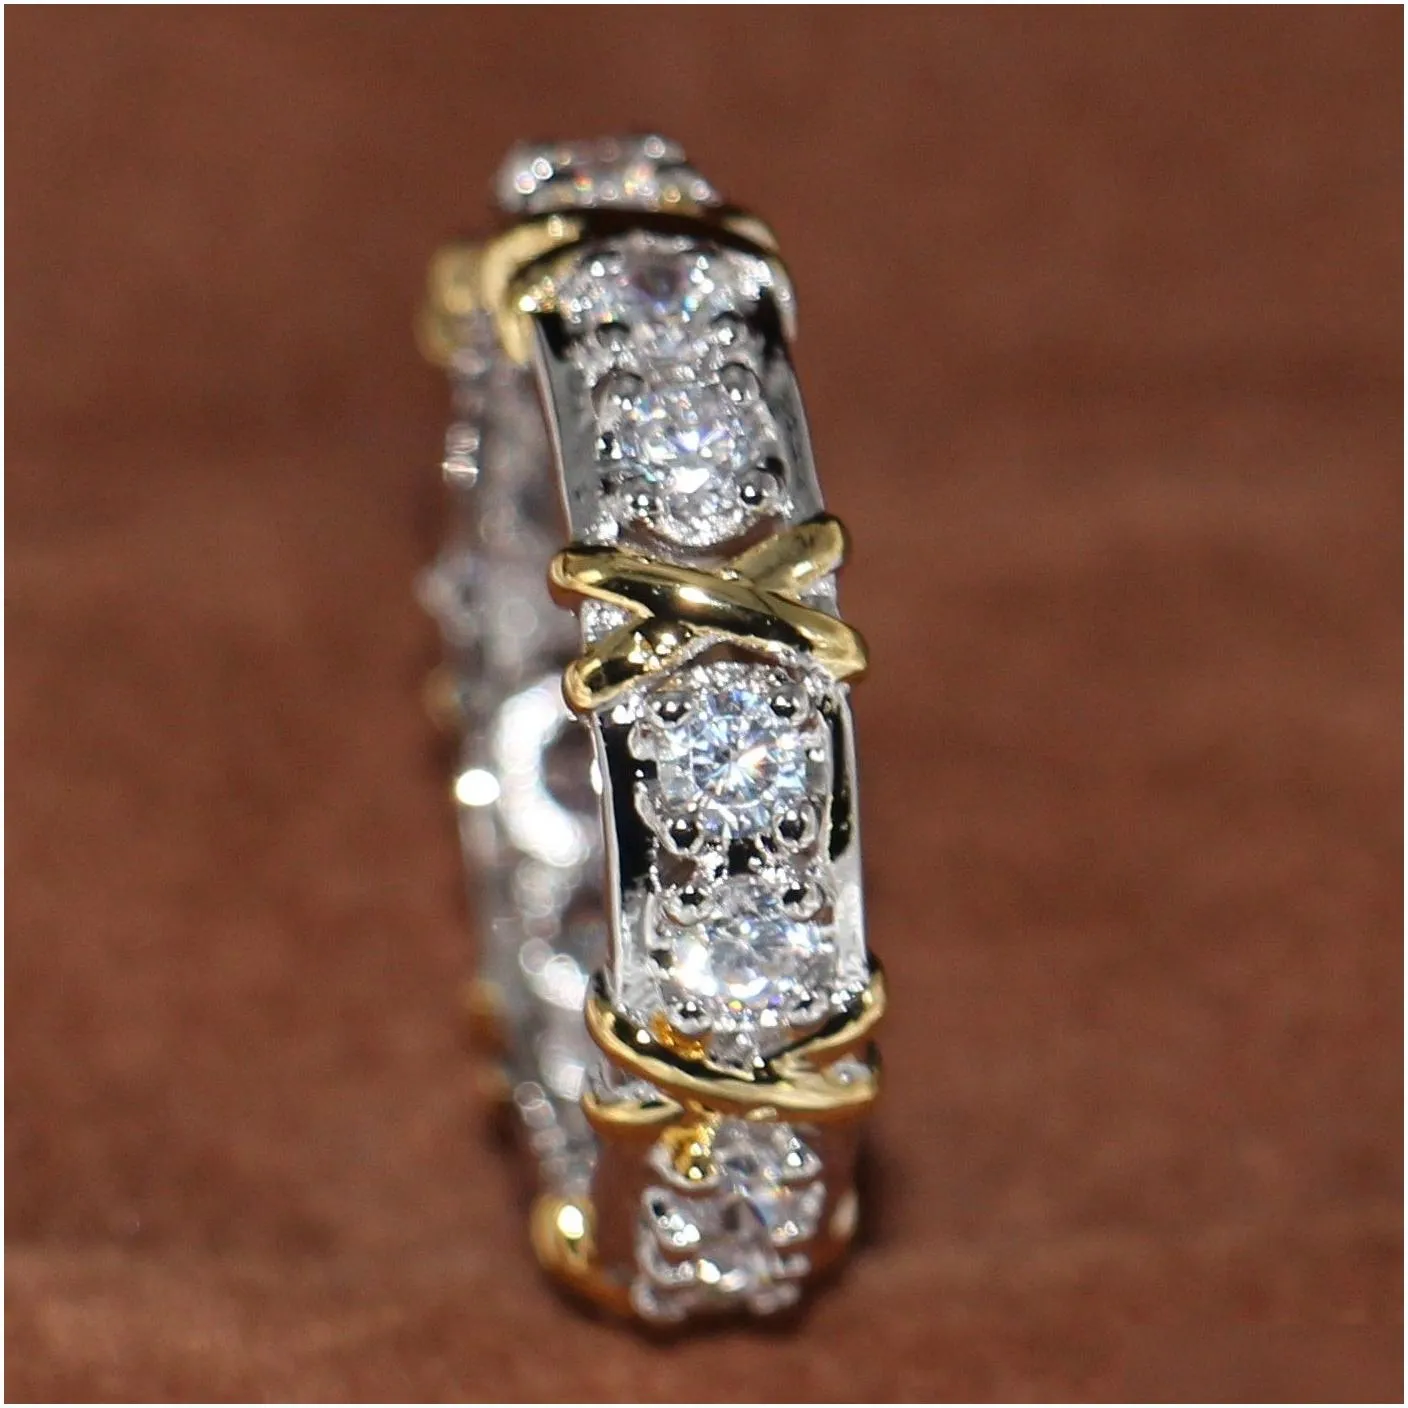 Wedding Rings Wholesale Professional Eternity Diamonique Cz Simated Diamond 10Kt White Yellow Gold Filled Wedding Band Cross Ring Size Dhdmh